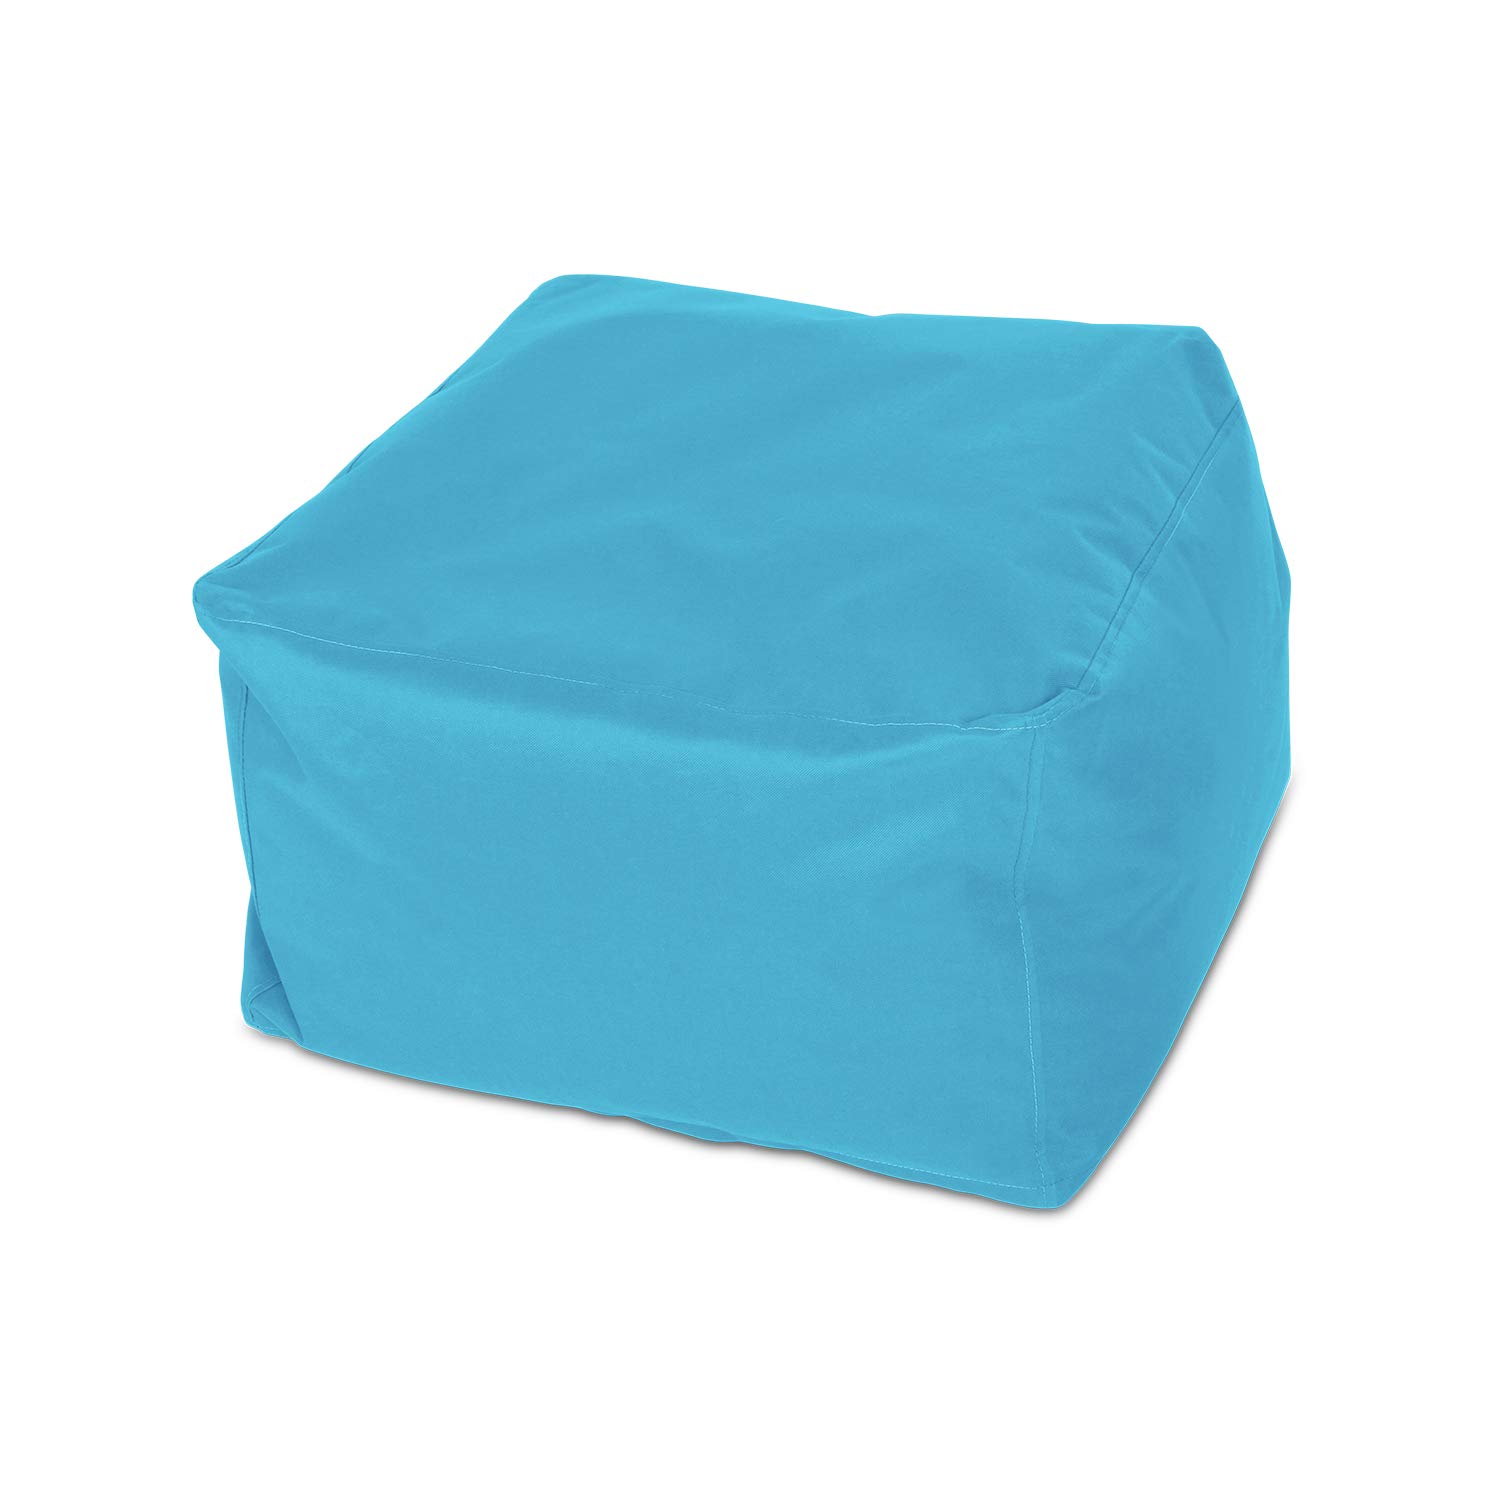 Knorr-Baby 440302 Stool Square L Colour Petrol Blue